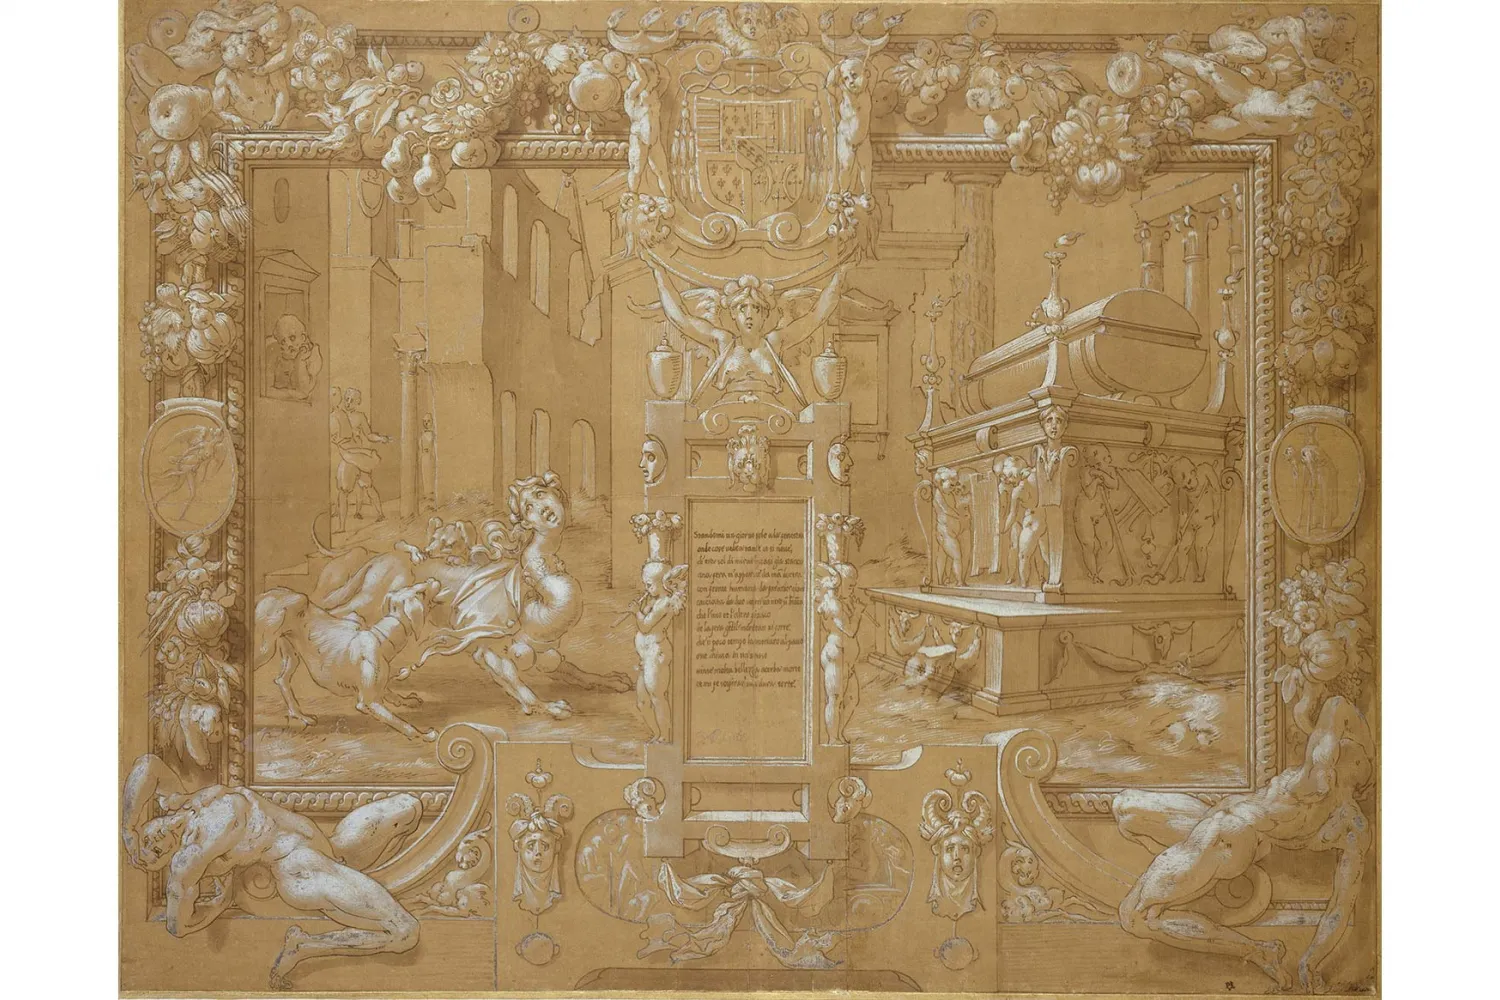 Rosso Fiorentino, An ornamental panel with scenes illustrating Petrarch, Pen and brown ink, with grey wash, heightened with white bodycolour on brown prepared paper, JBS 125. 